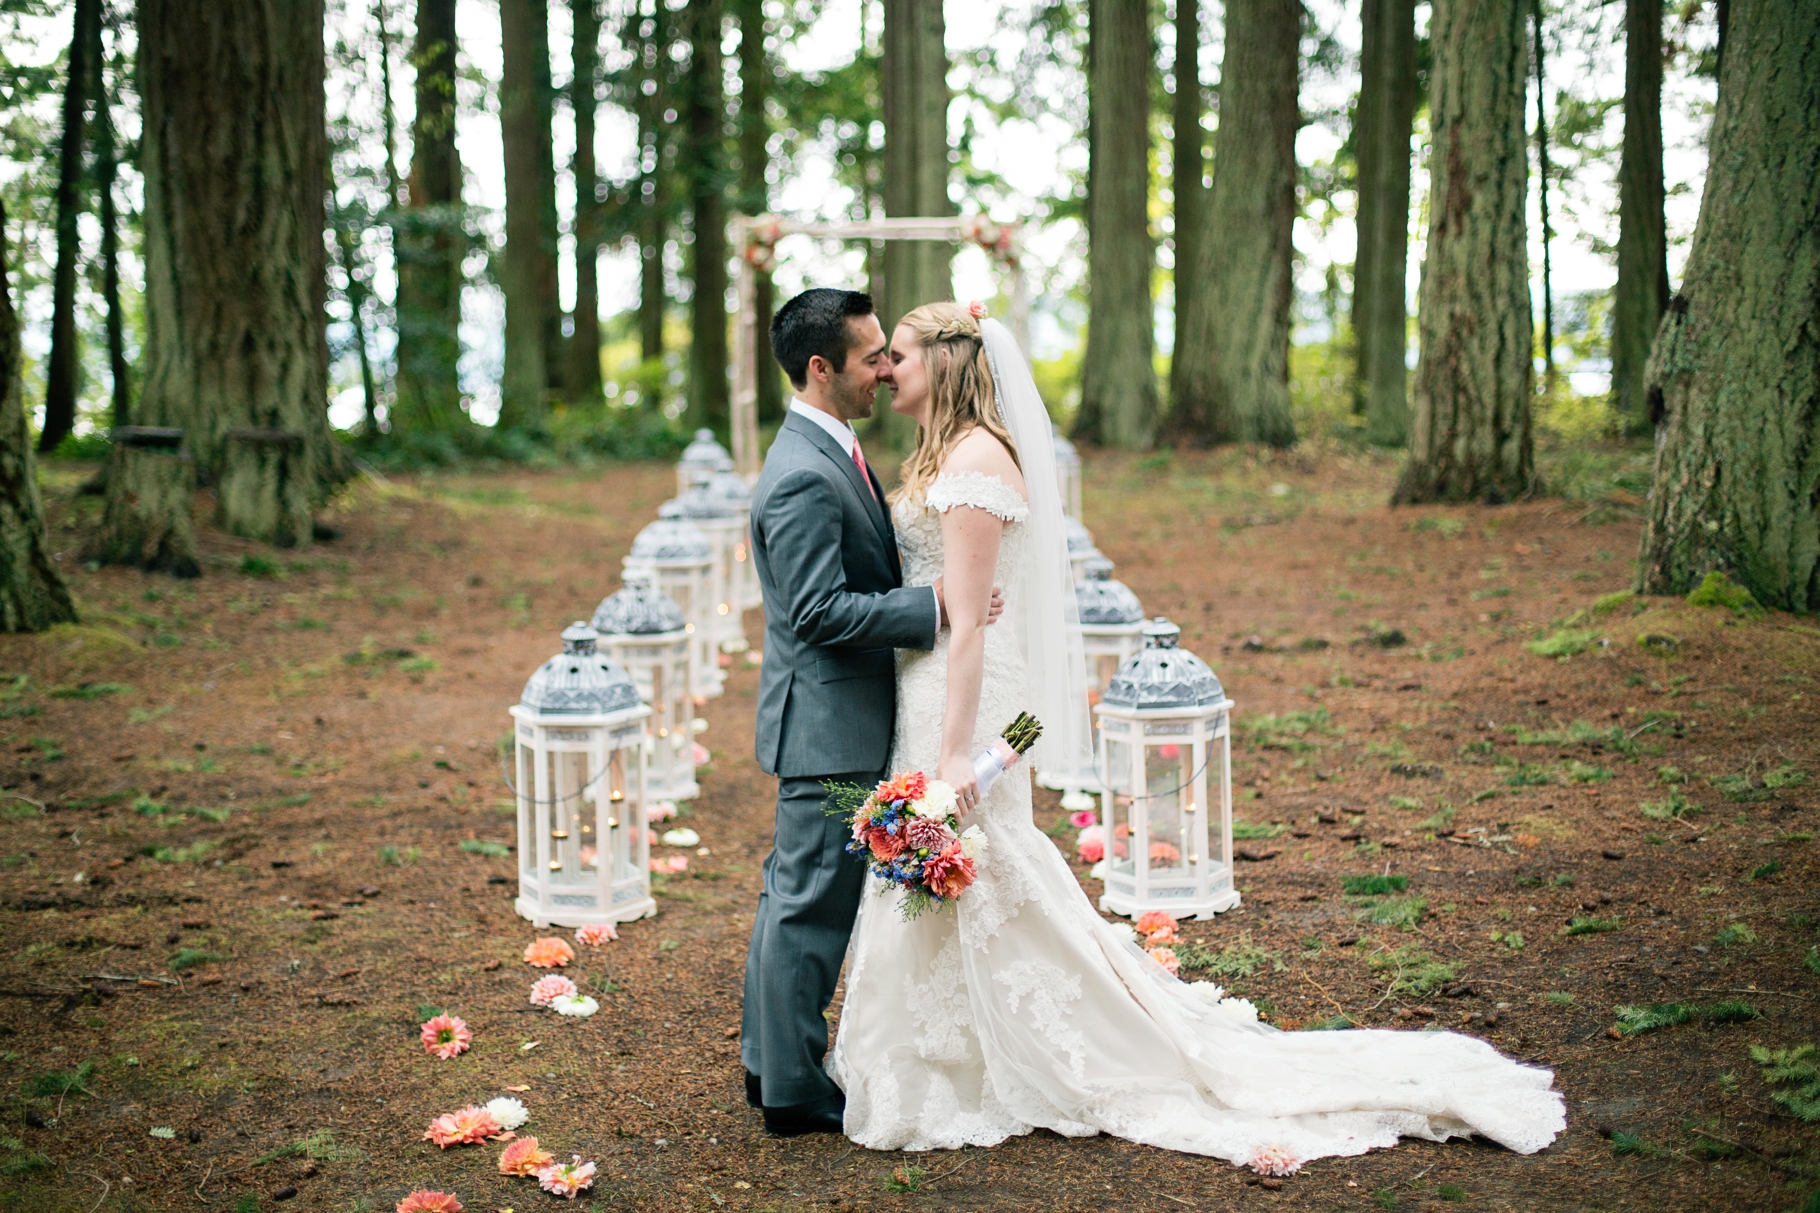 44-Bride-Groom-Portraits-Married-wooded-bluff-olympic-mountains-log-cabin-Kitsap-Memorial-State-Park-Forest-Northwest-Photographer-Seattle-Wedding-Photography-by-Betty-Elaine